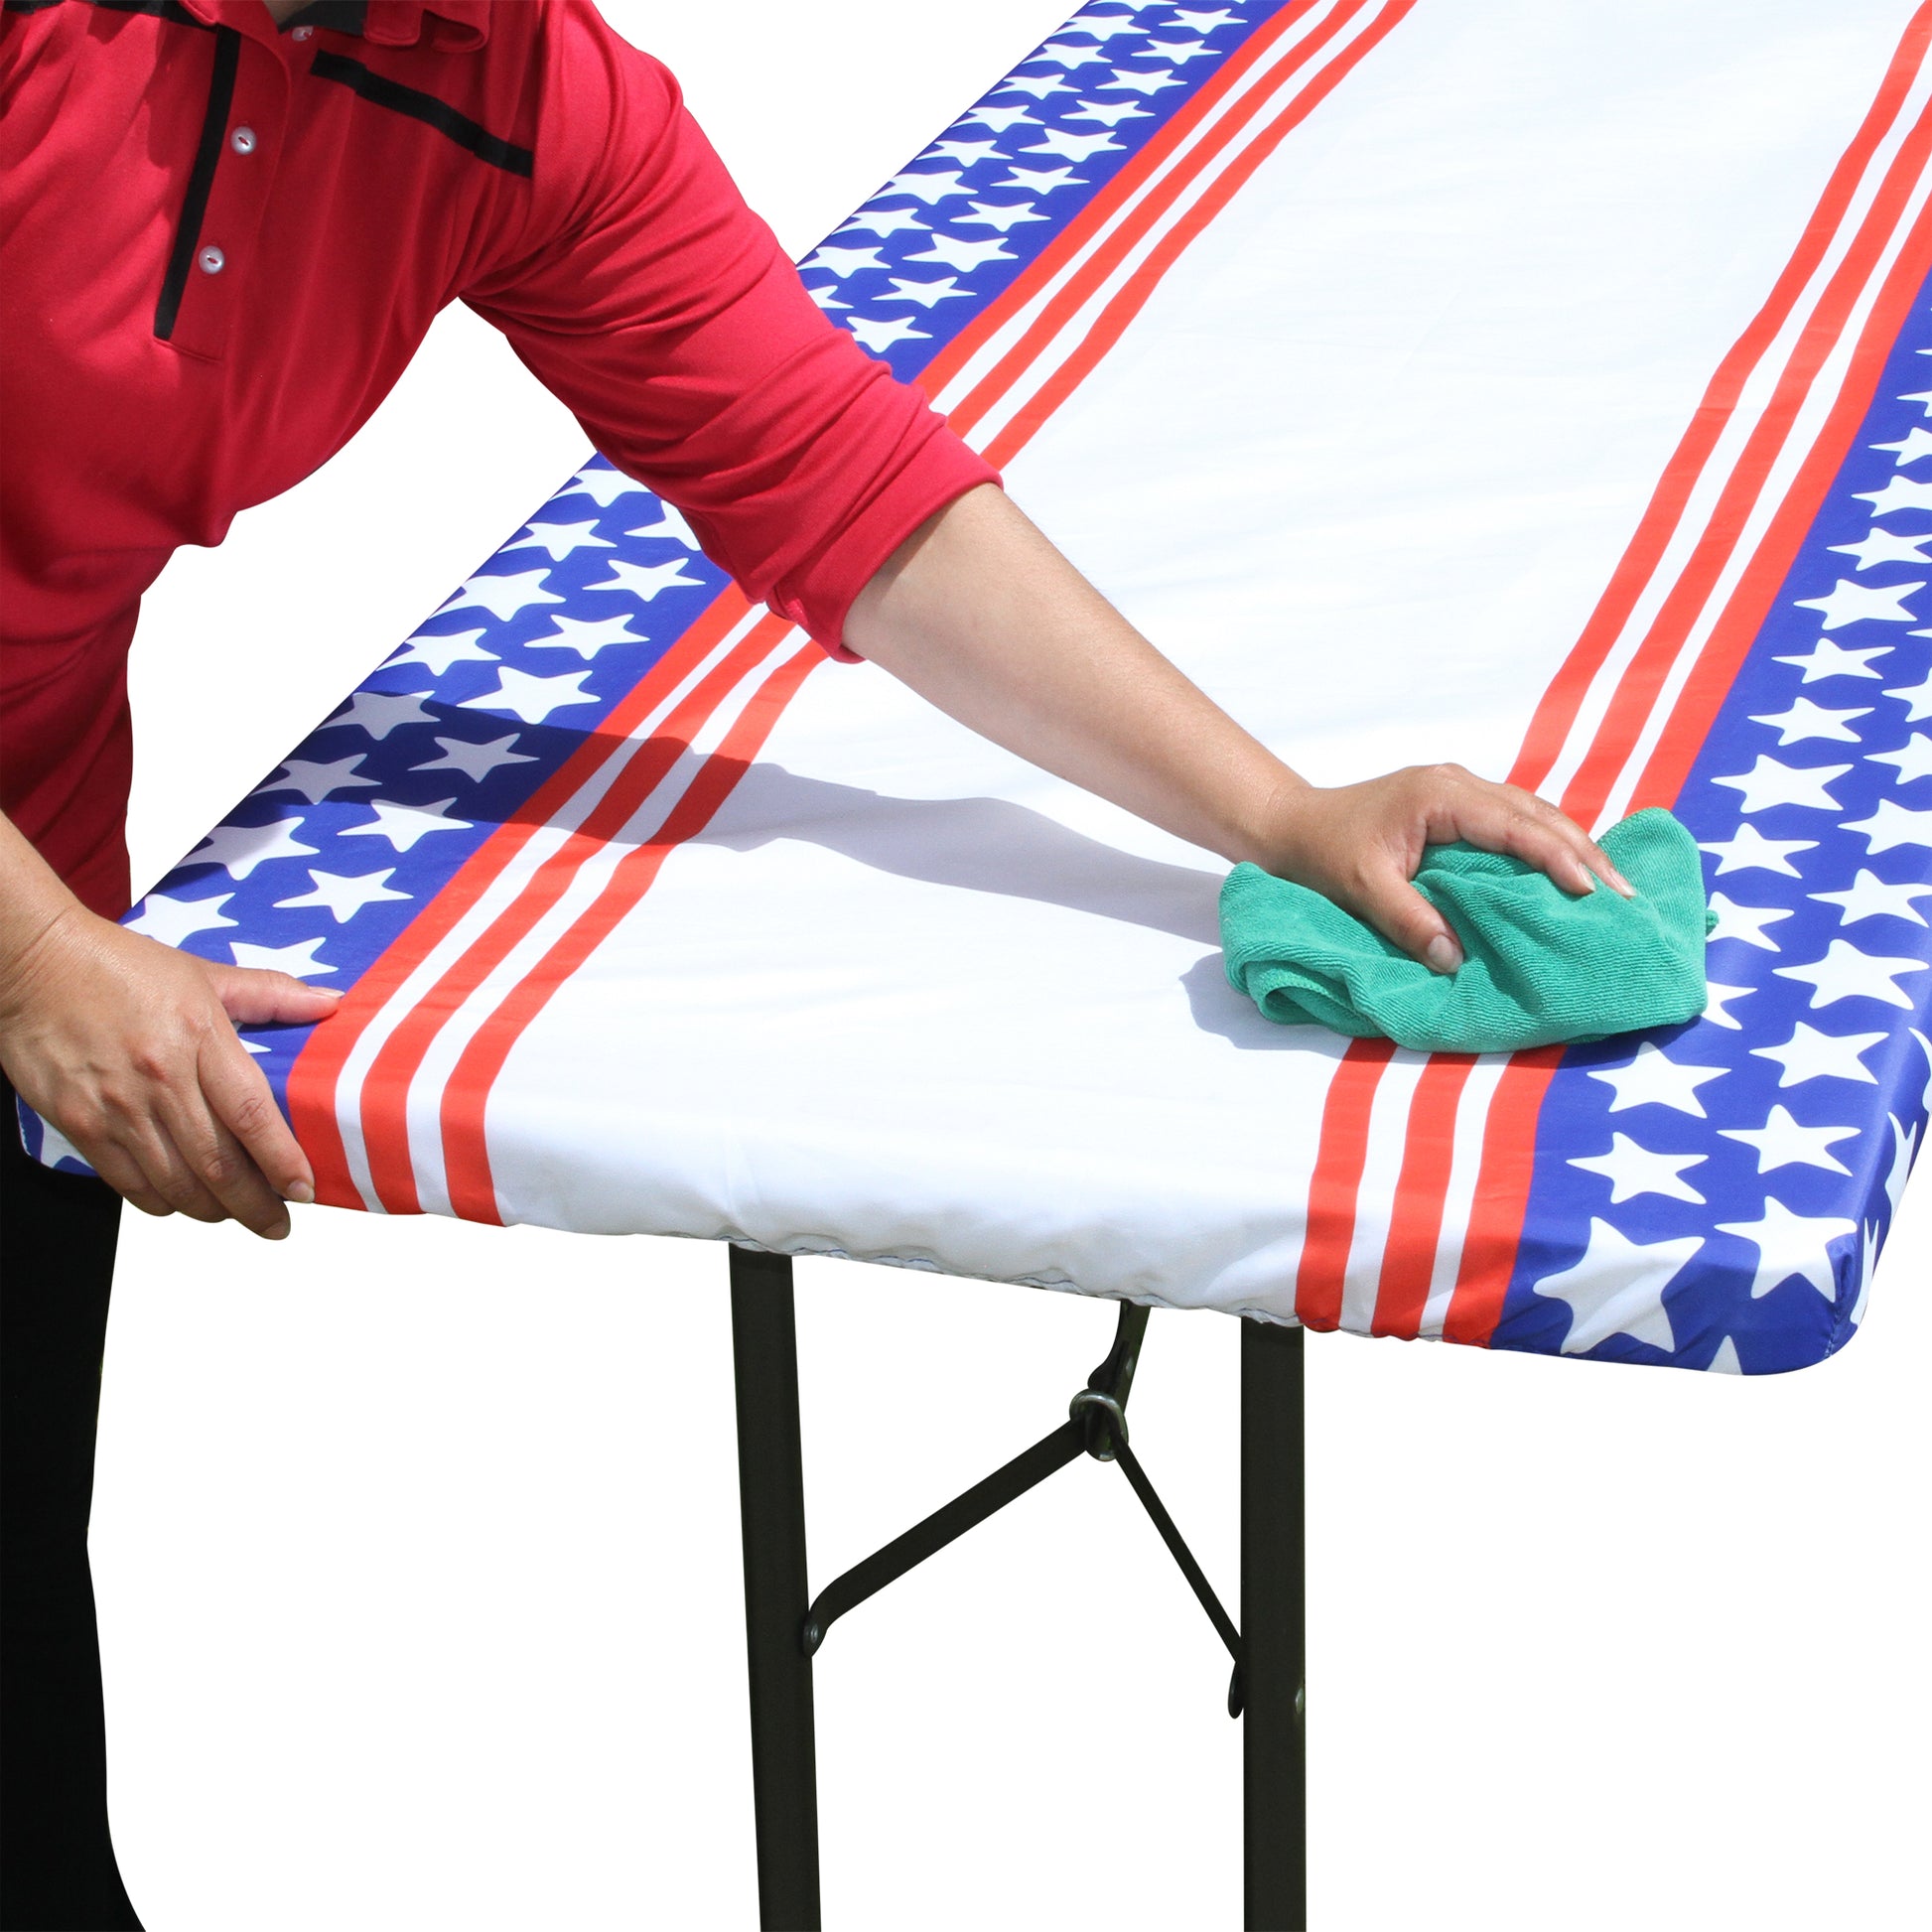 TableCloth PLUS 72" Stars & Stripes Fitted Polyester Tablecloth for 6' Folding Tables is easy to wipe clean